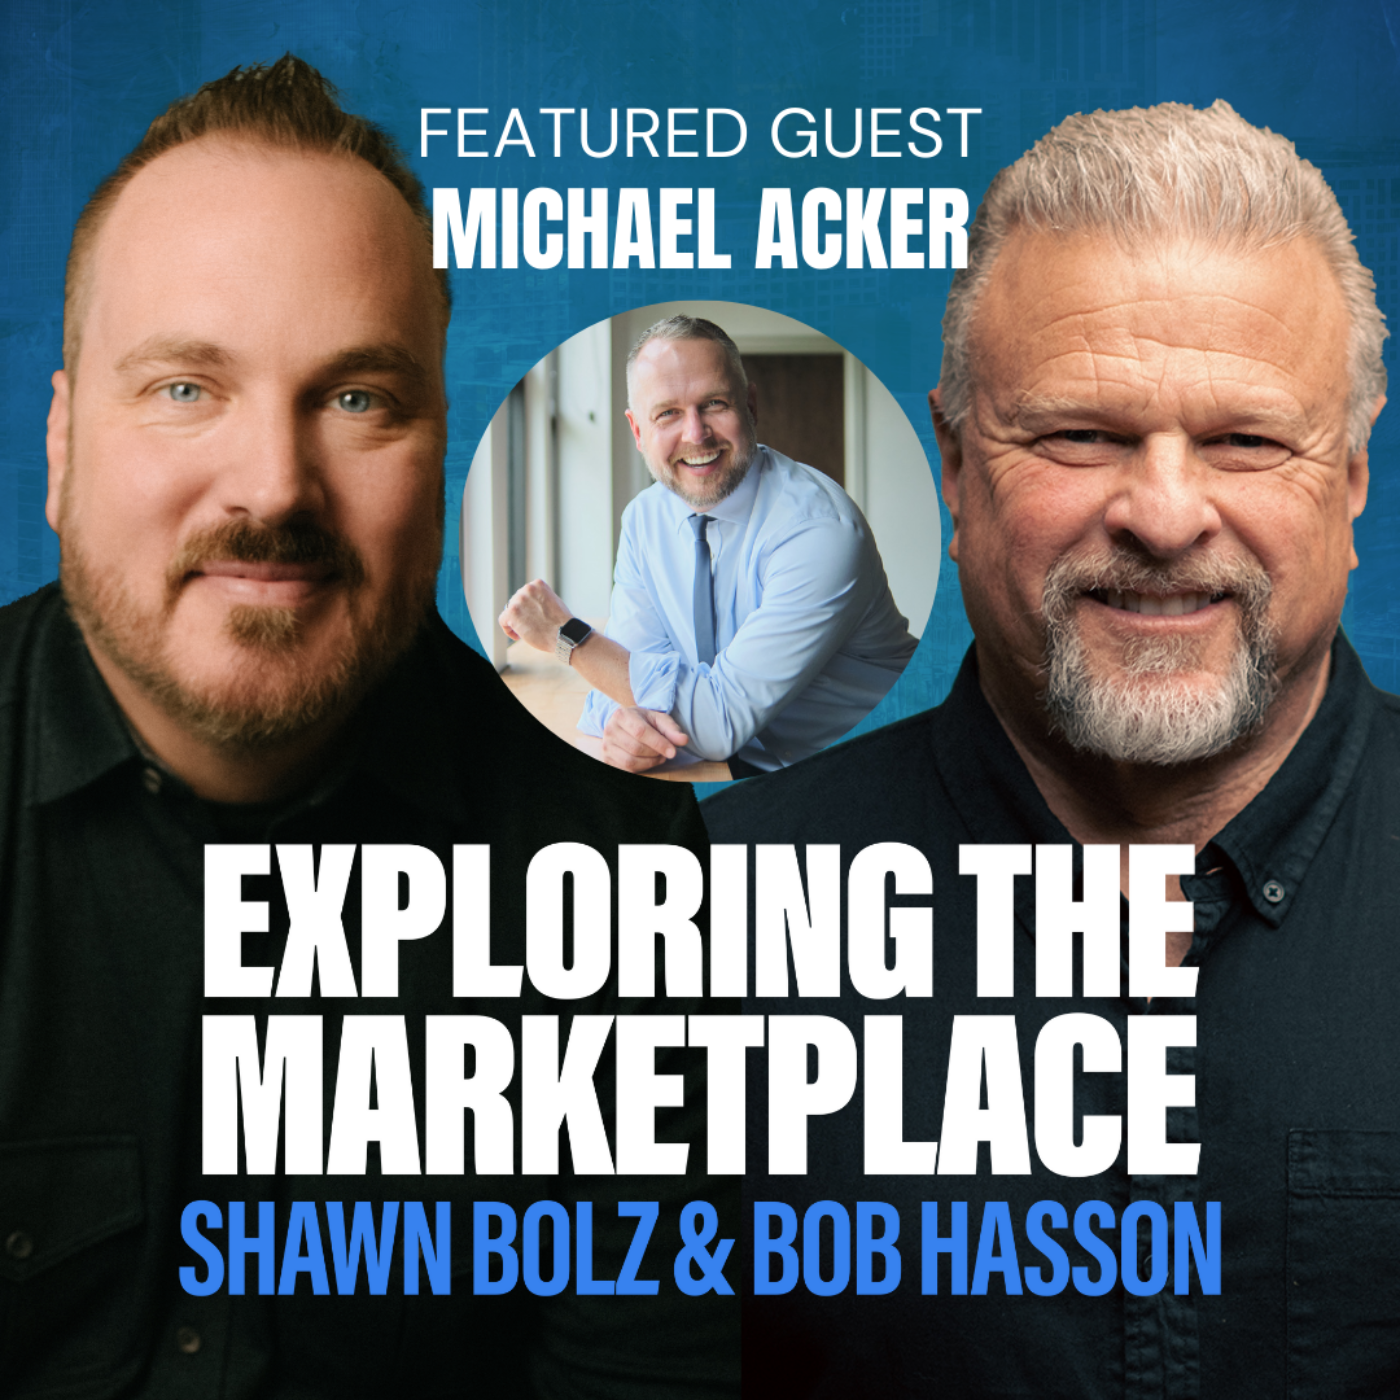 From Ministry to Marketplace: Michael Acker's Journey of Faith, Burnout, and Corporate Success on Exploring the Marketplace (S:4 - Ep 13)